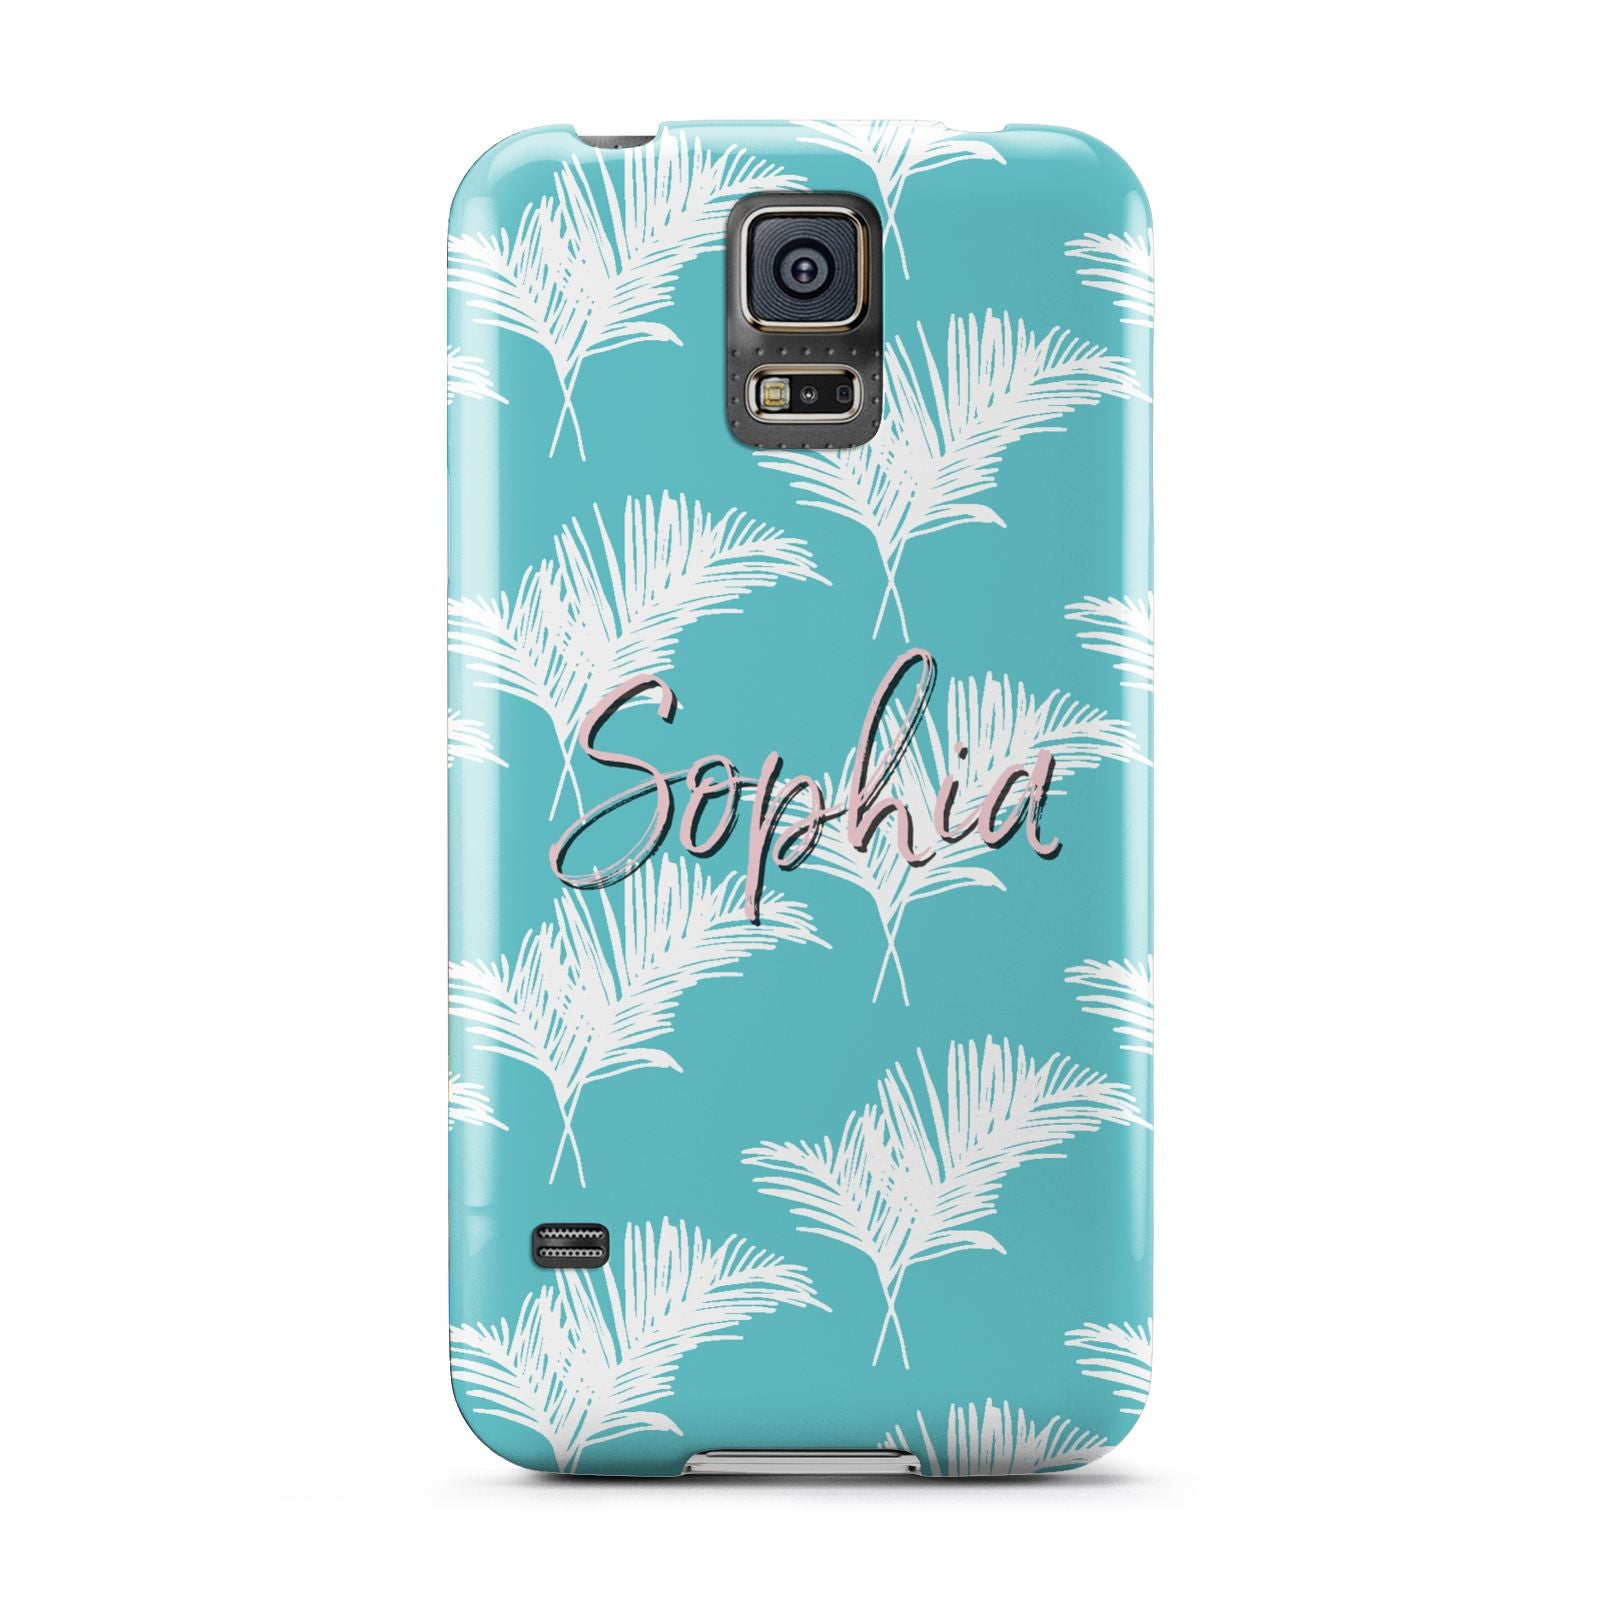 Personalised Blue White Tropical Foliage Samsung Galaxy S5 Case